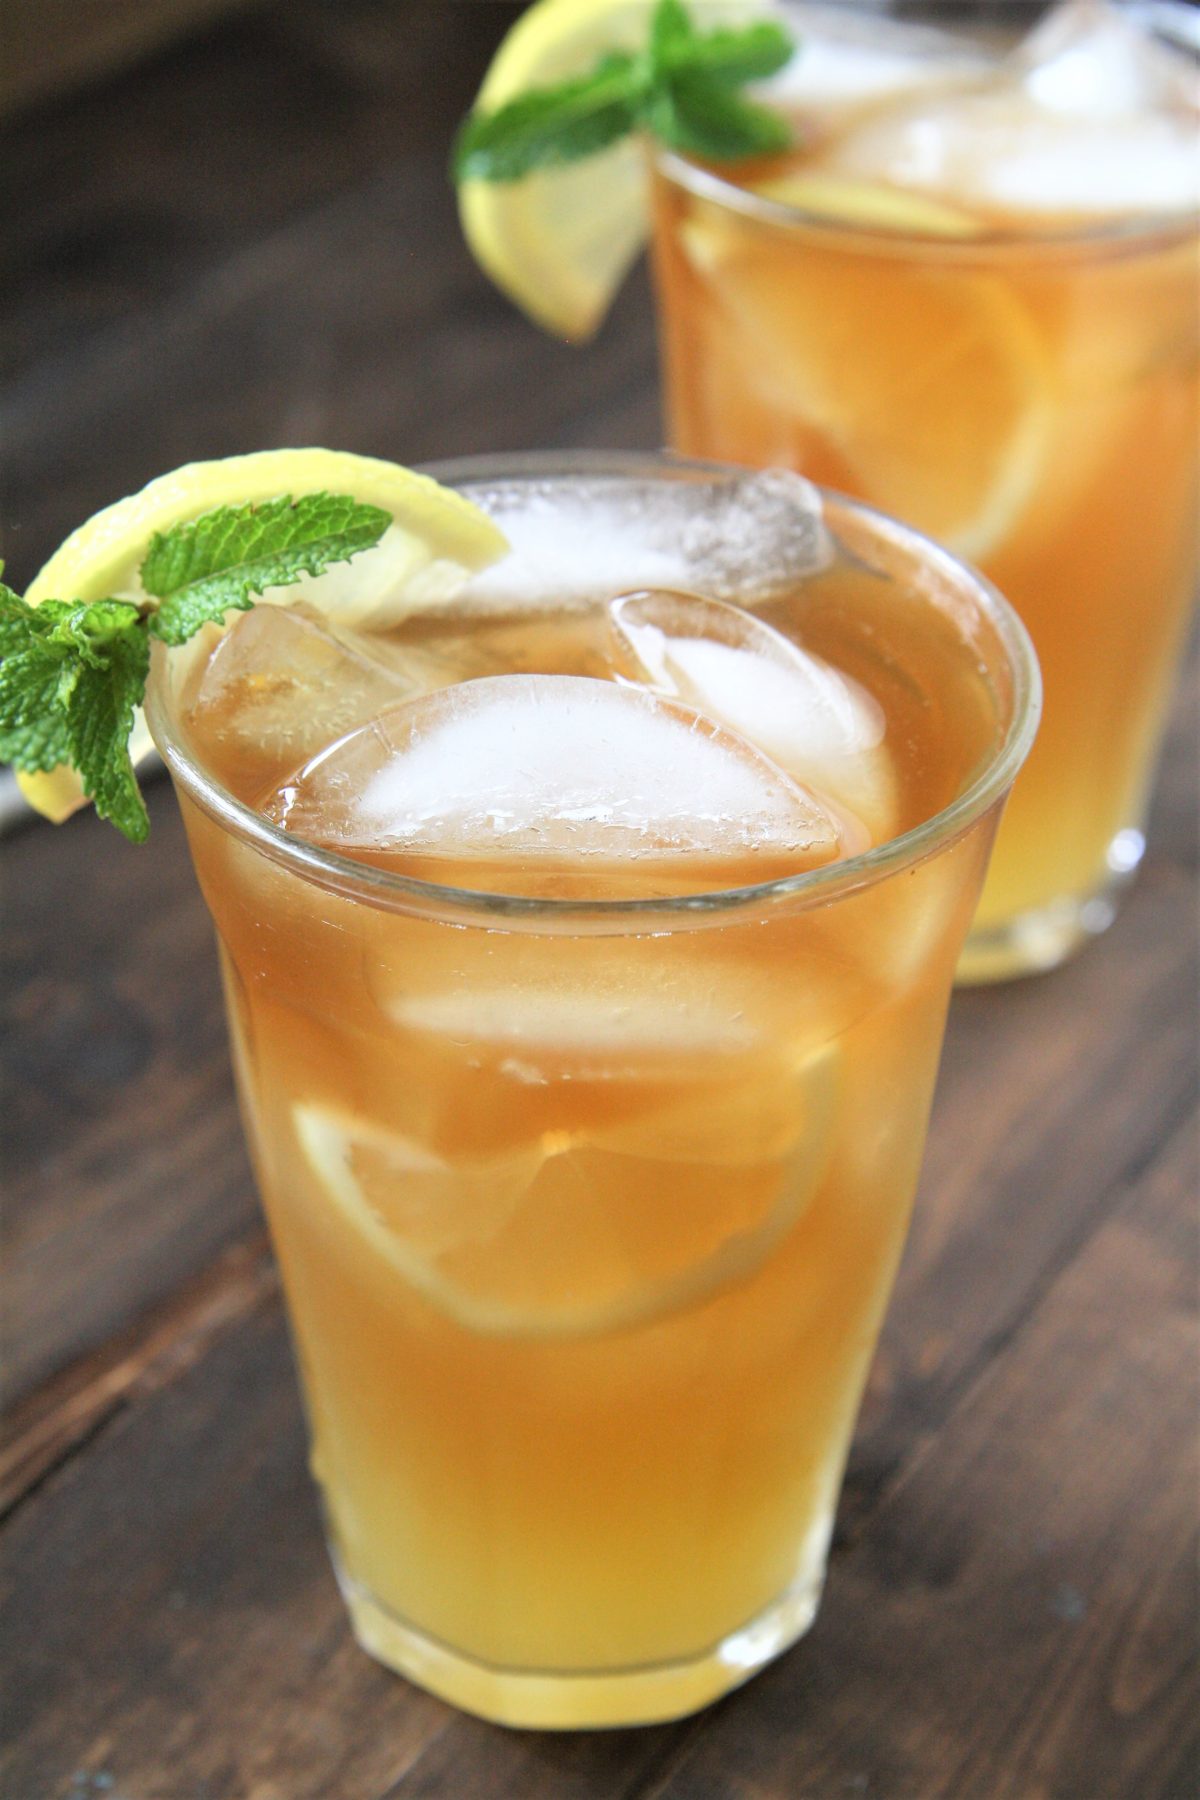 This half iced tea and half lemonade or Arnold Palmer drink recipe combines freshly brewed sweet iced tea with refreshing lemonade for the perfect drink to quench your thirst!